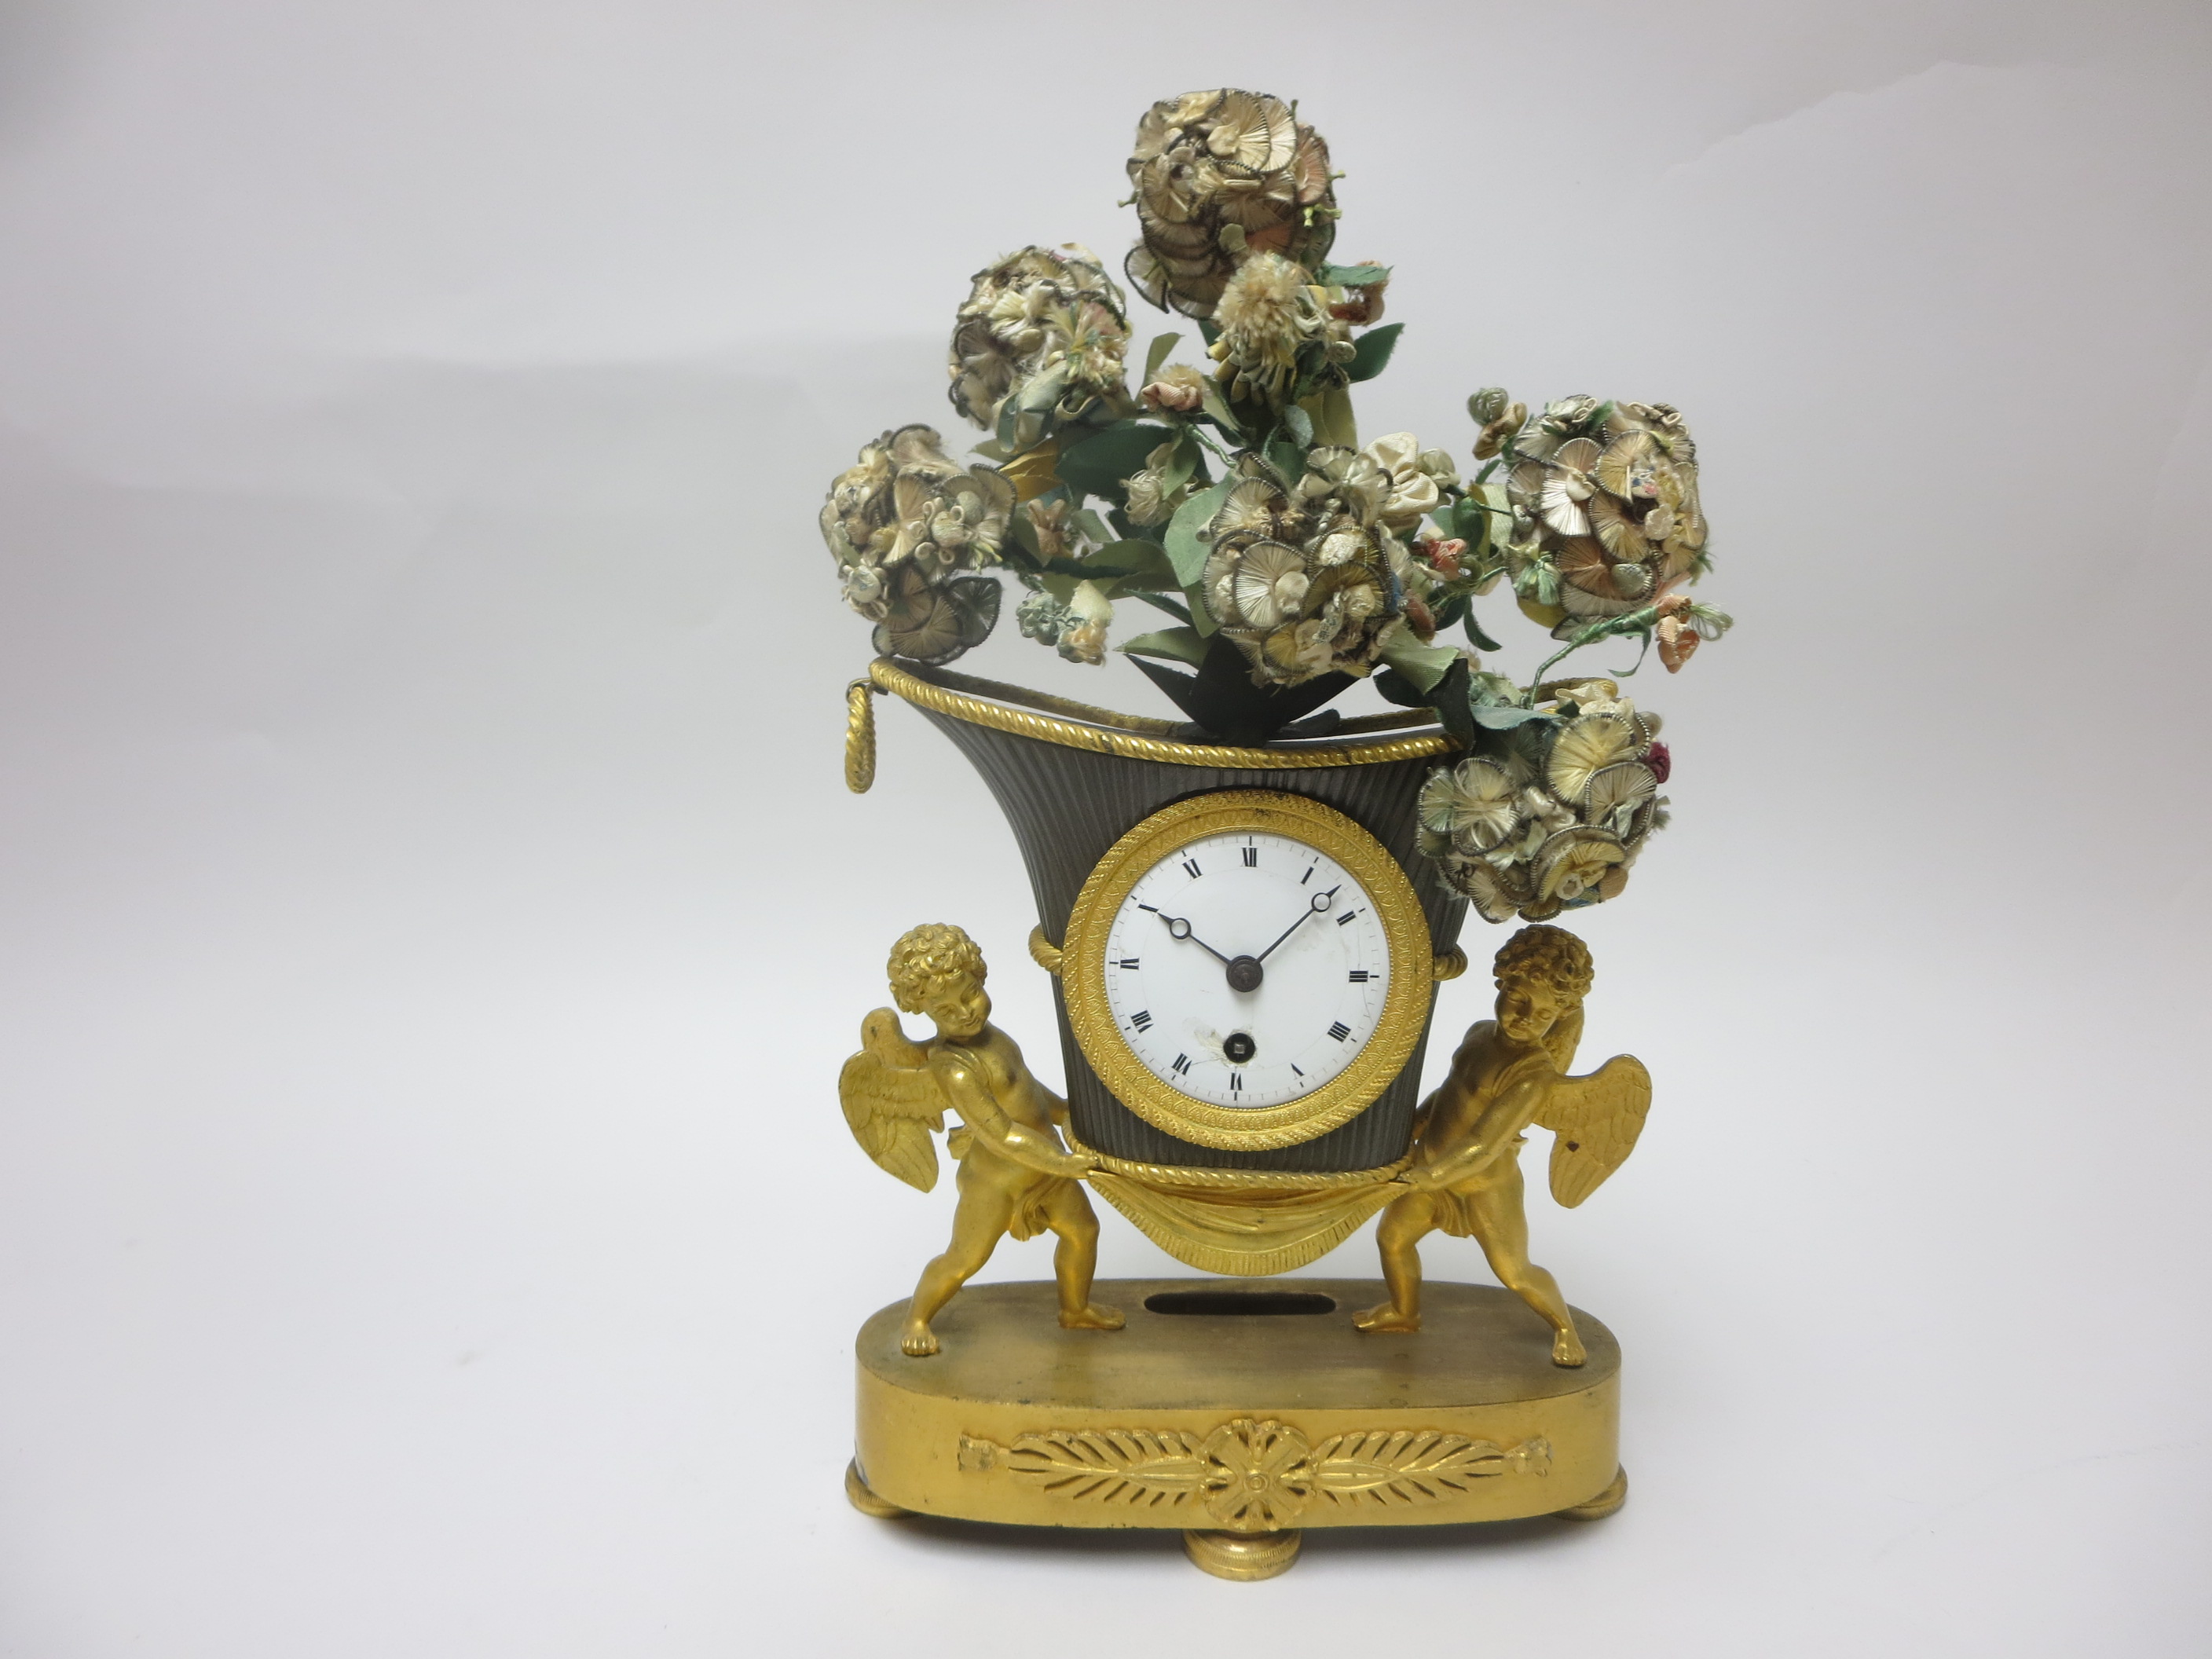 A 19th Century French Mantel Clock with white enamel dial in vase shape surround supported by two